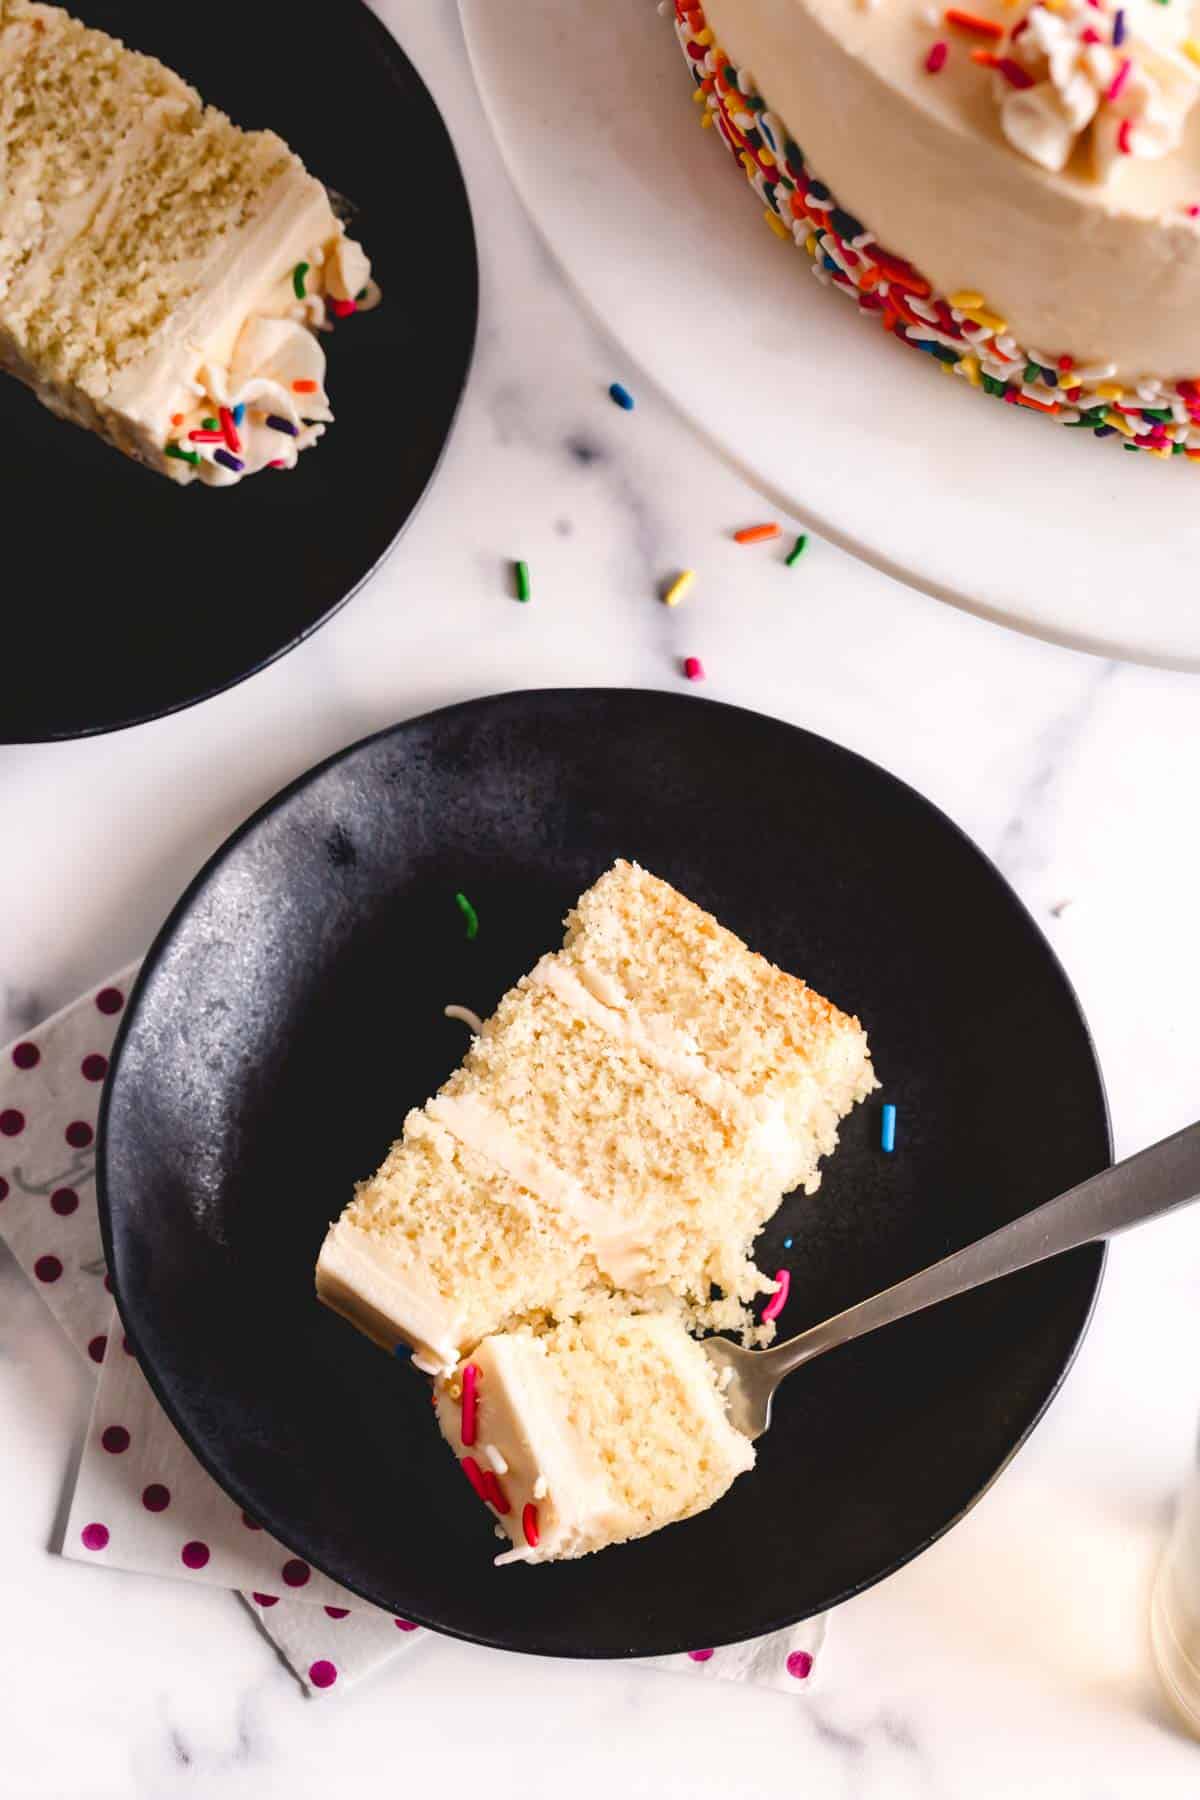 Slices of vanilla bean cake on black plates with a fork holding a bite.